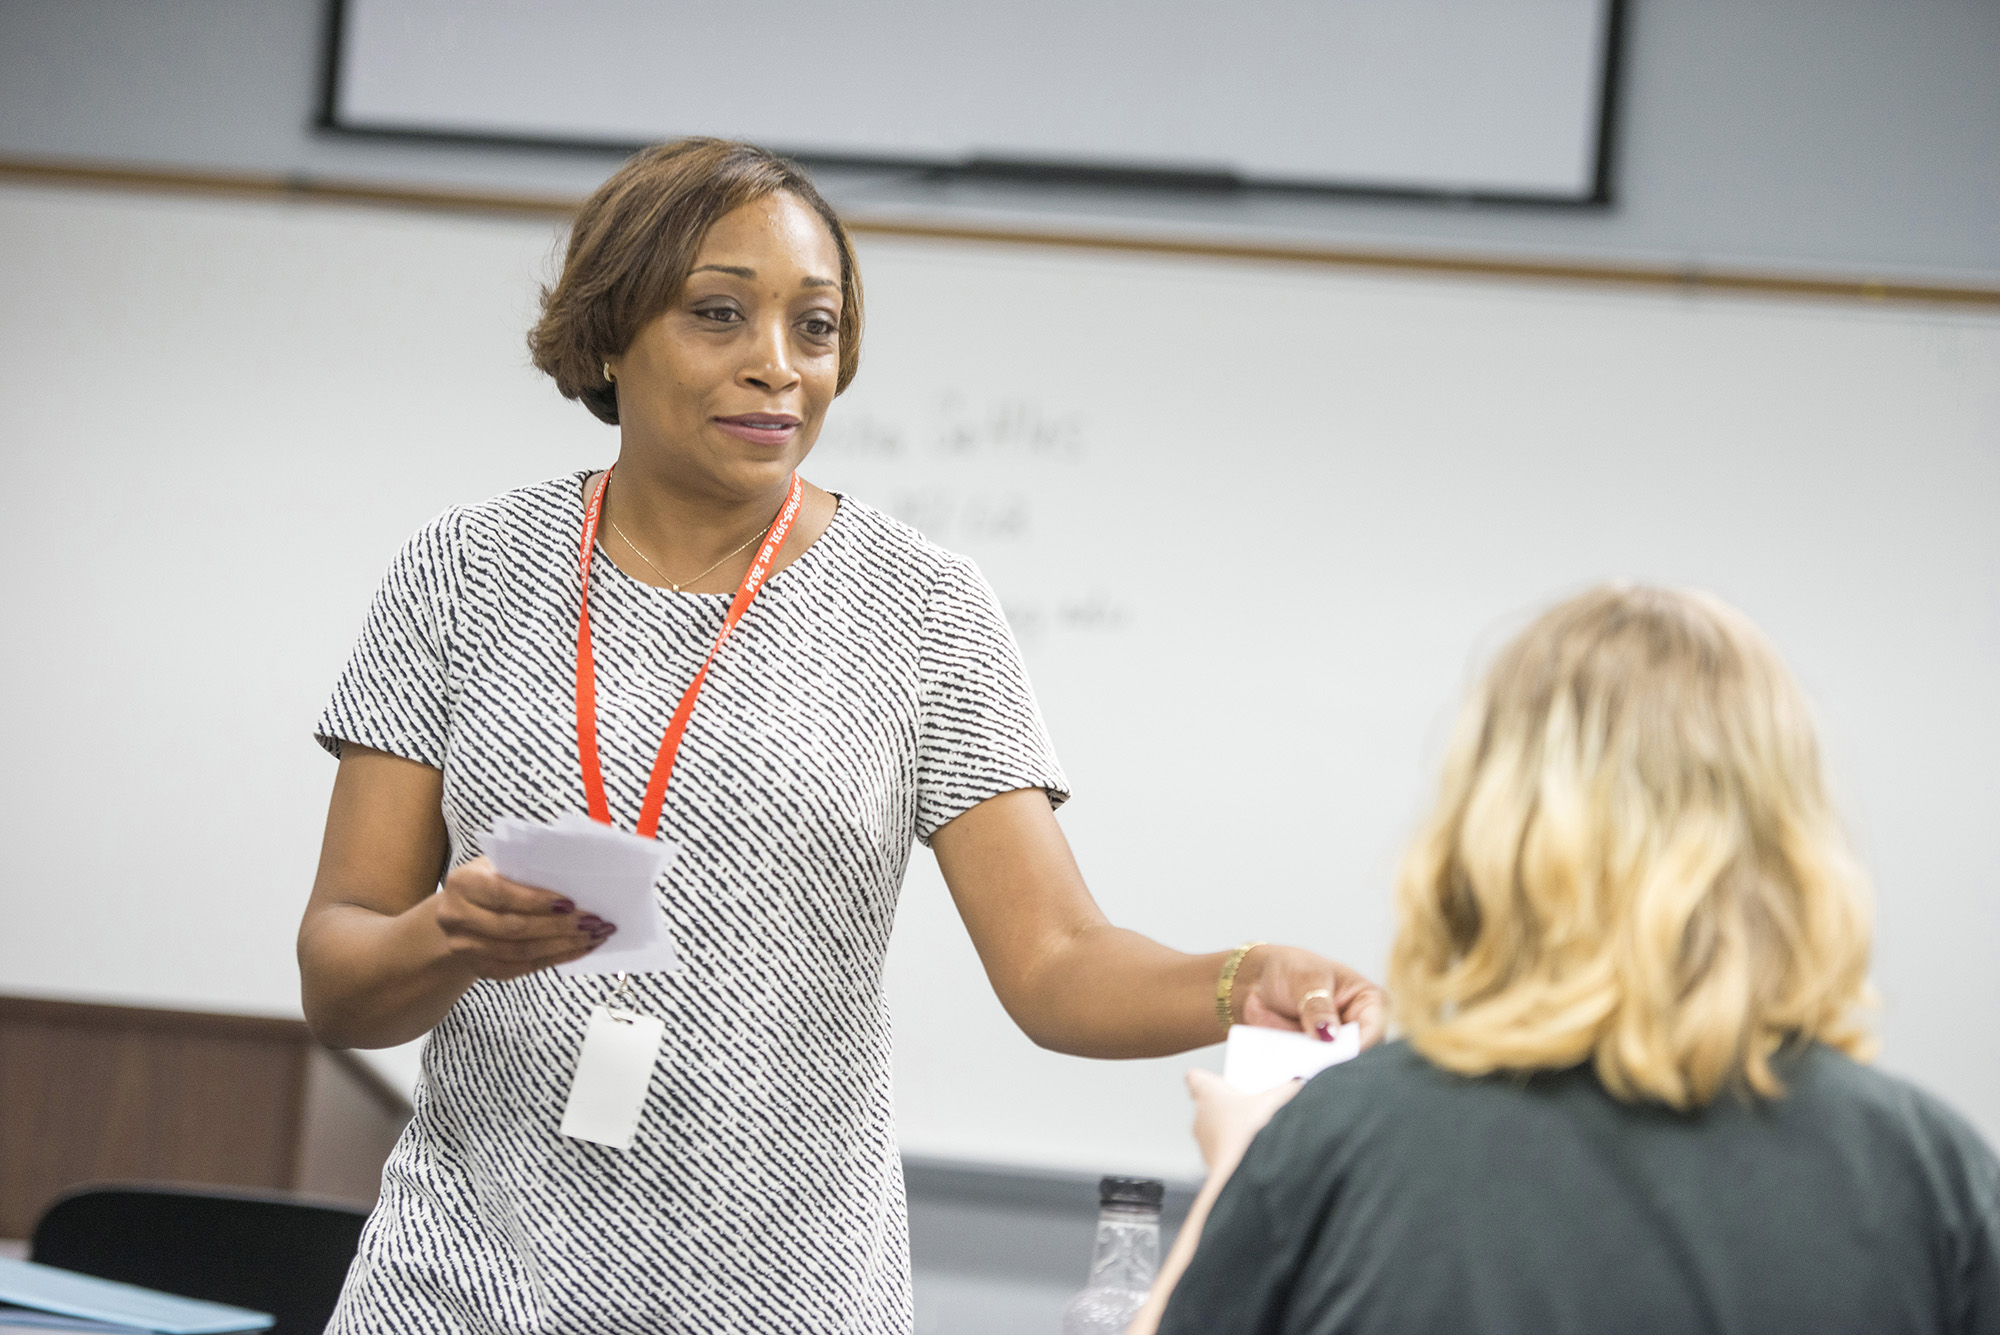 KCC alum and adjunct instructor Nikeesha Settles hands out papers during a class.